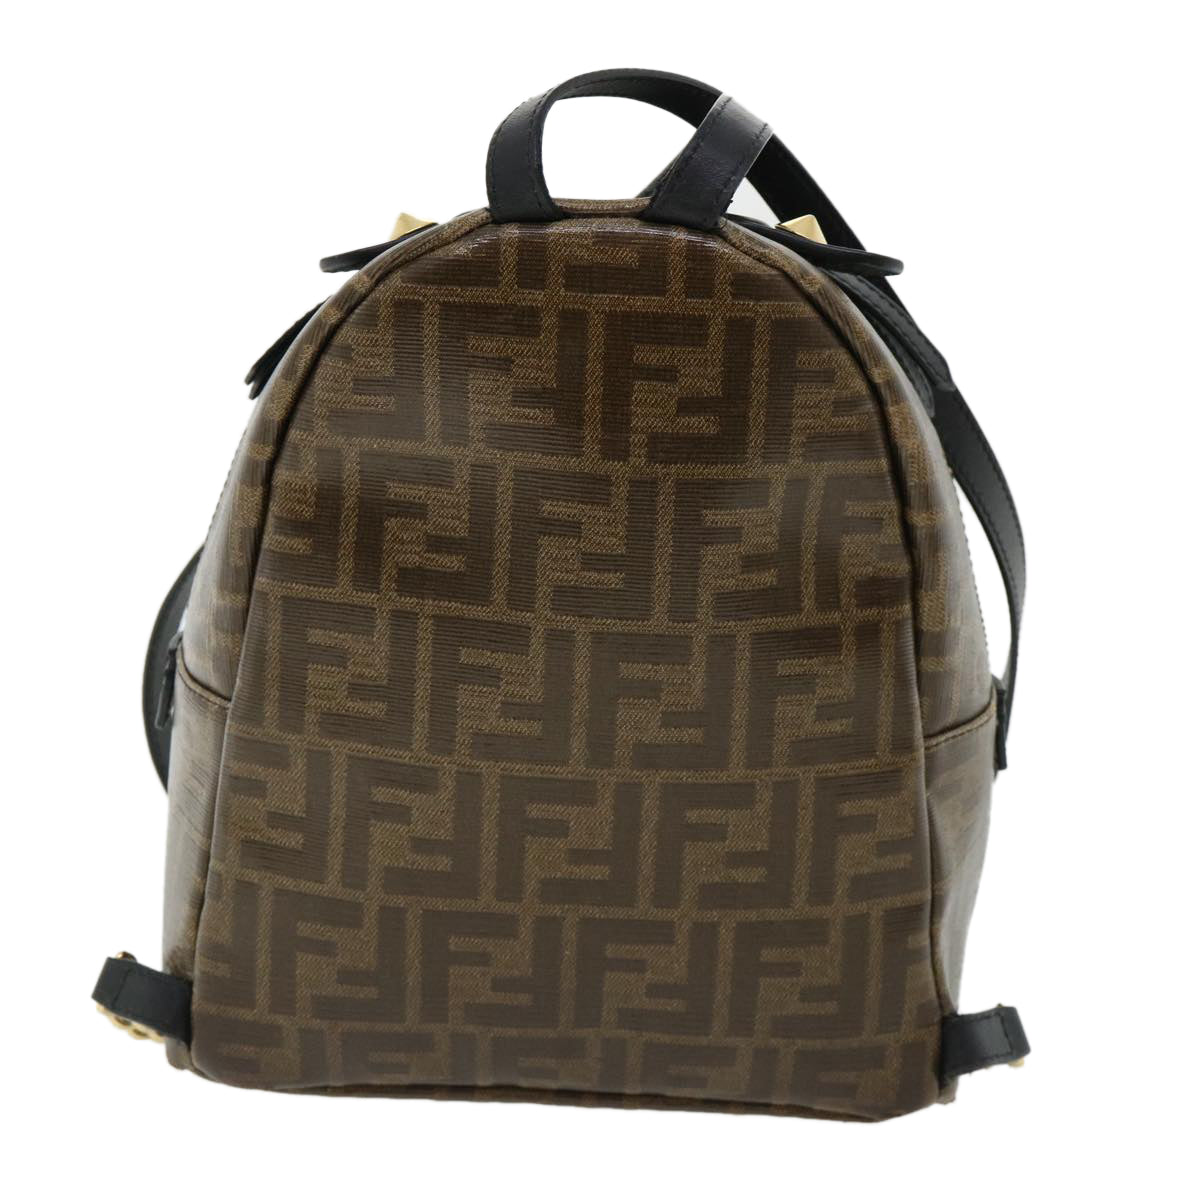 FENDI Zucca Canvas Backpack Coated Canvas Brown Black 8BZ038 Auth 32630A